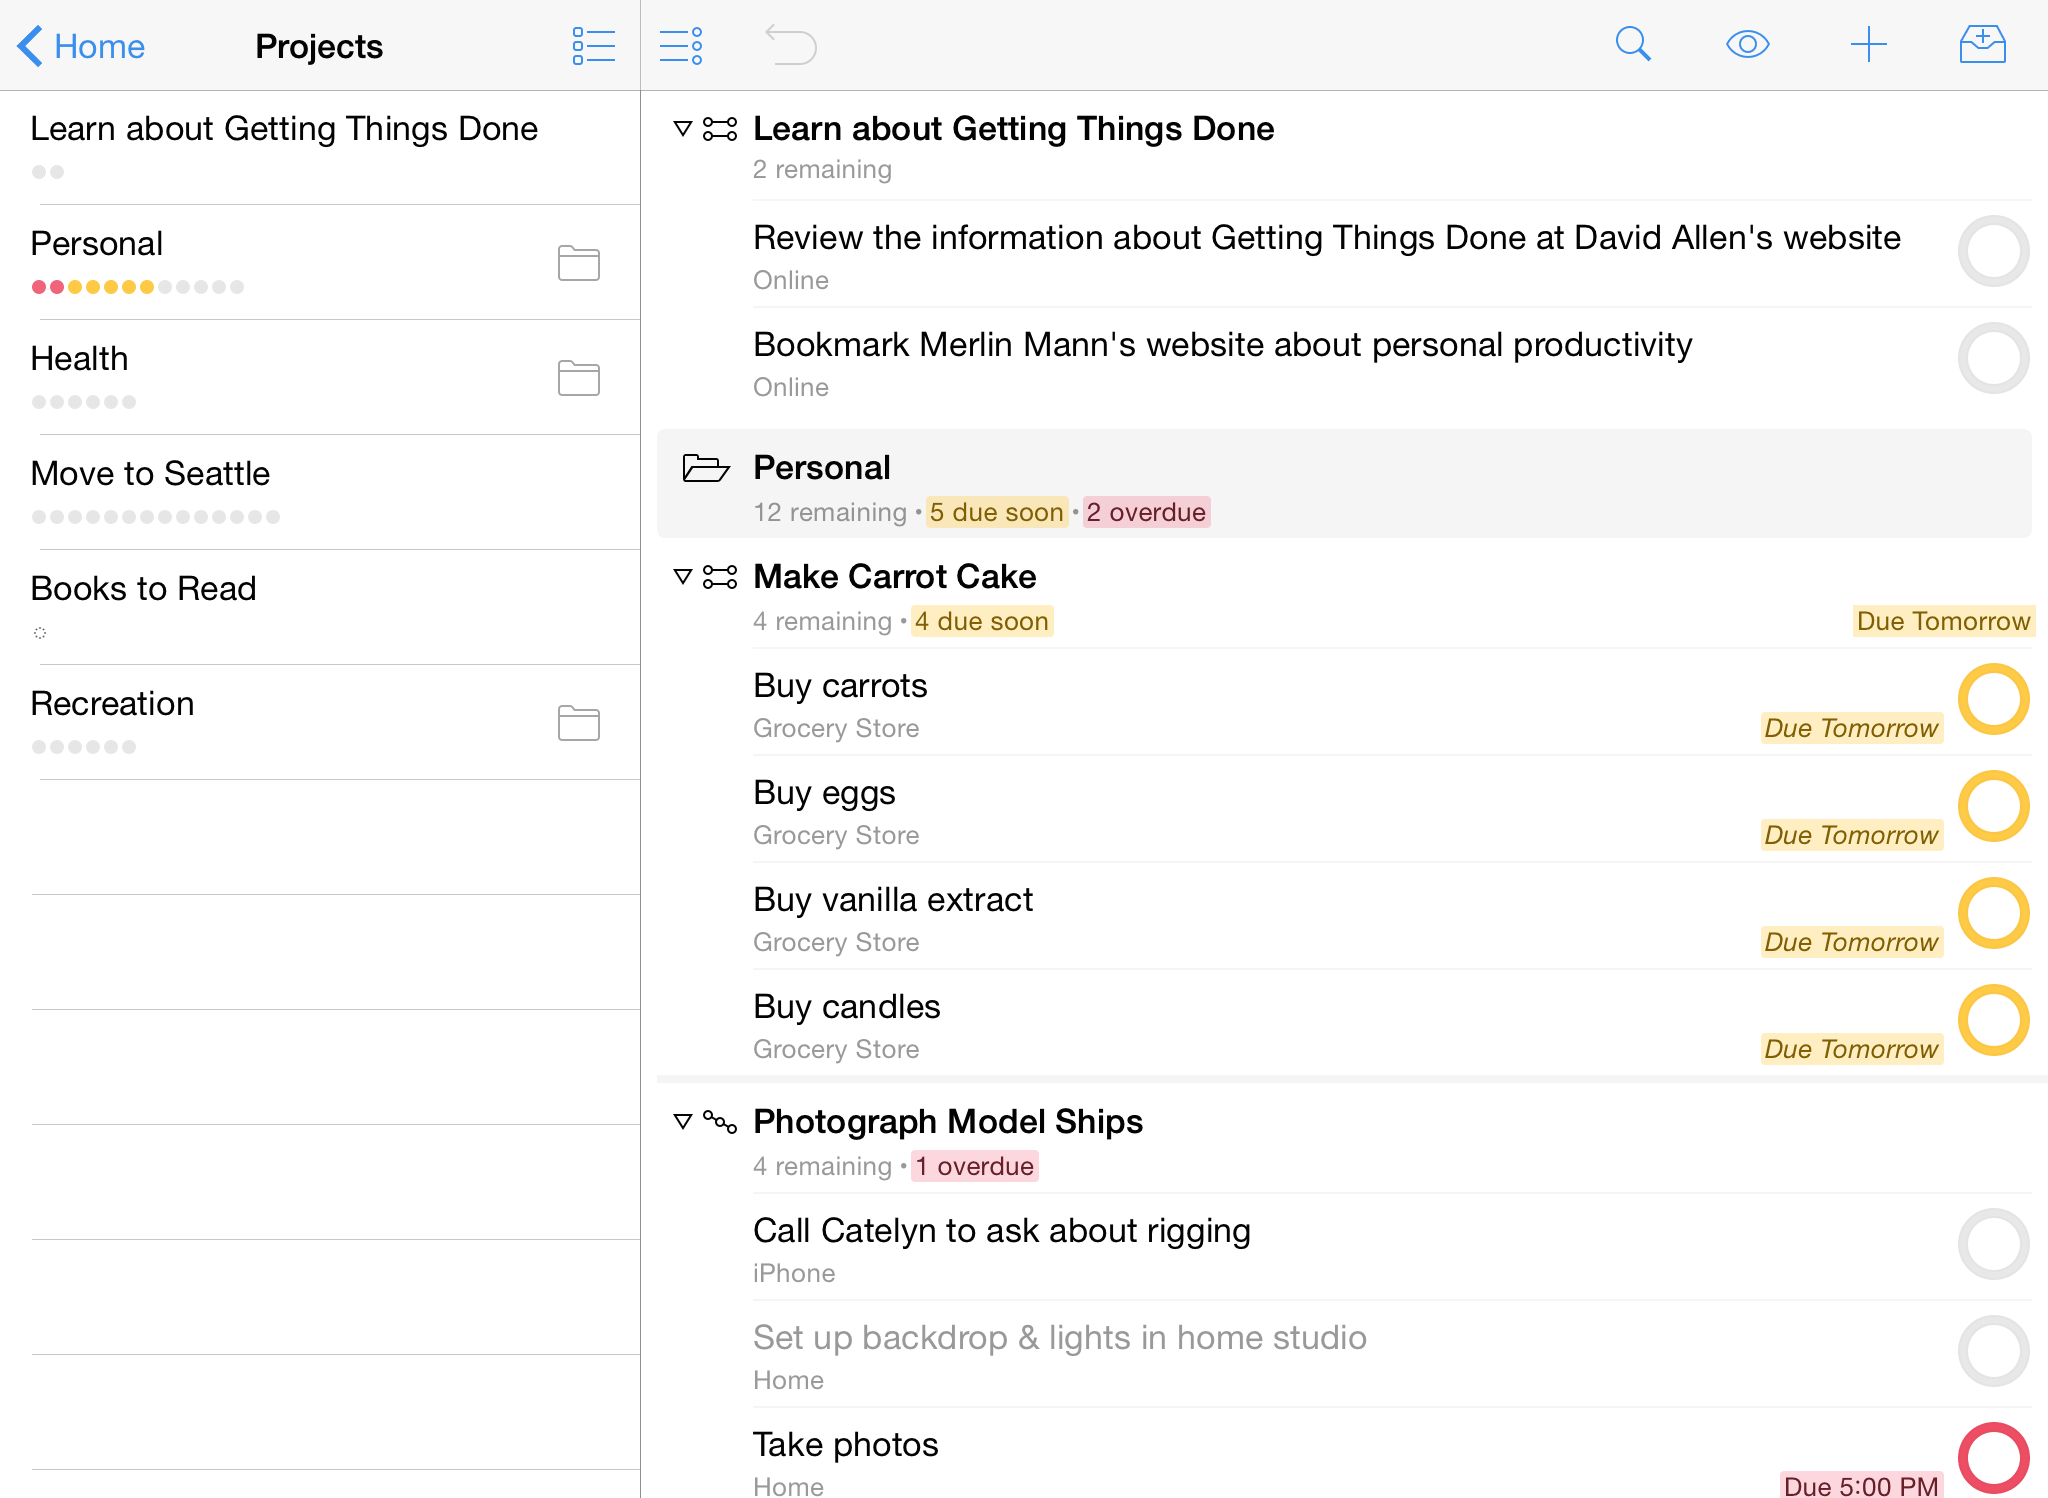 An example of the Projects perspective in OmniFocus 2 for iOS on iPad.